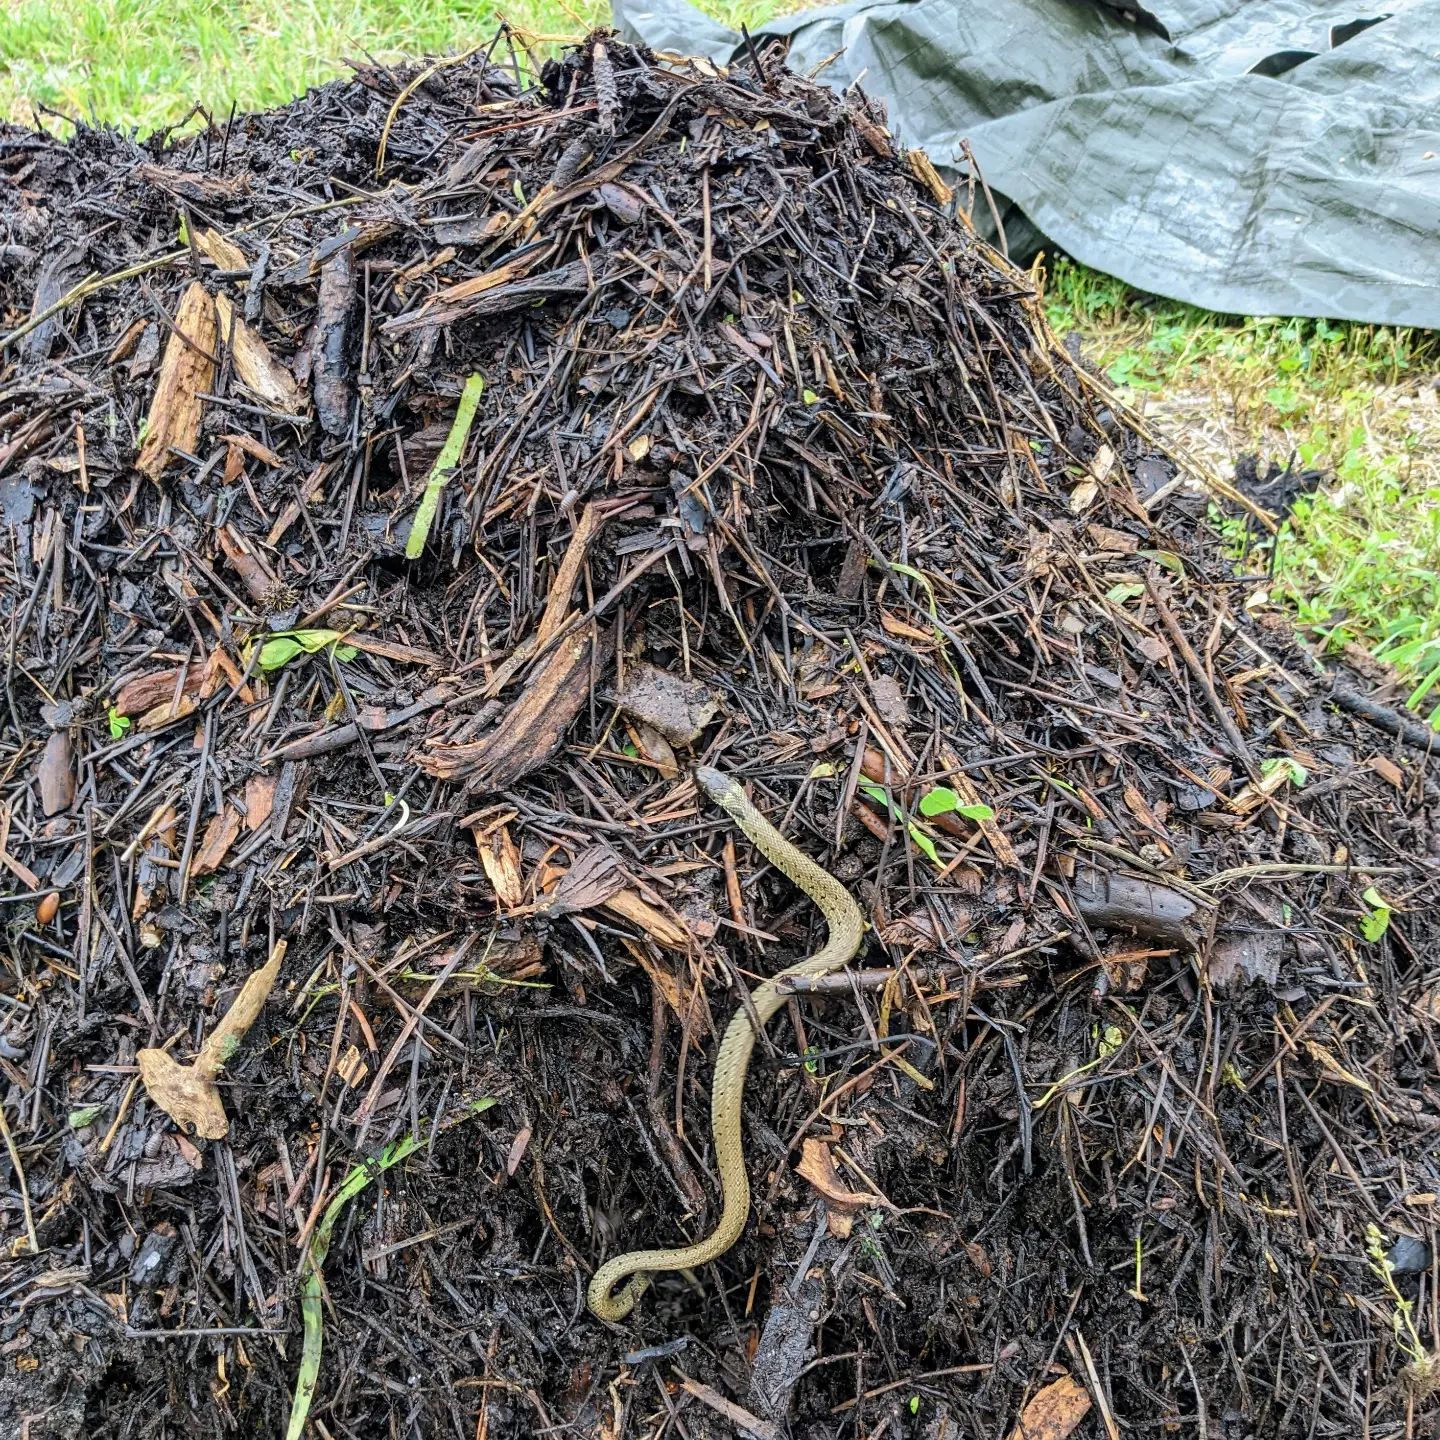 Small (baby?) snake I surprised in the compost pile while turning it